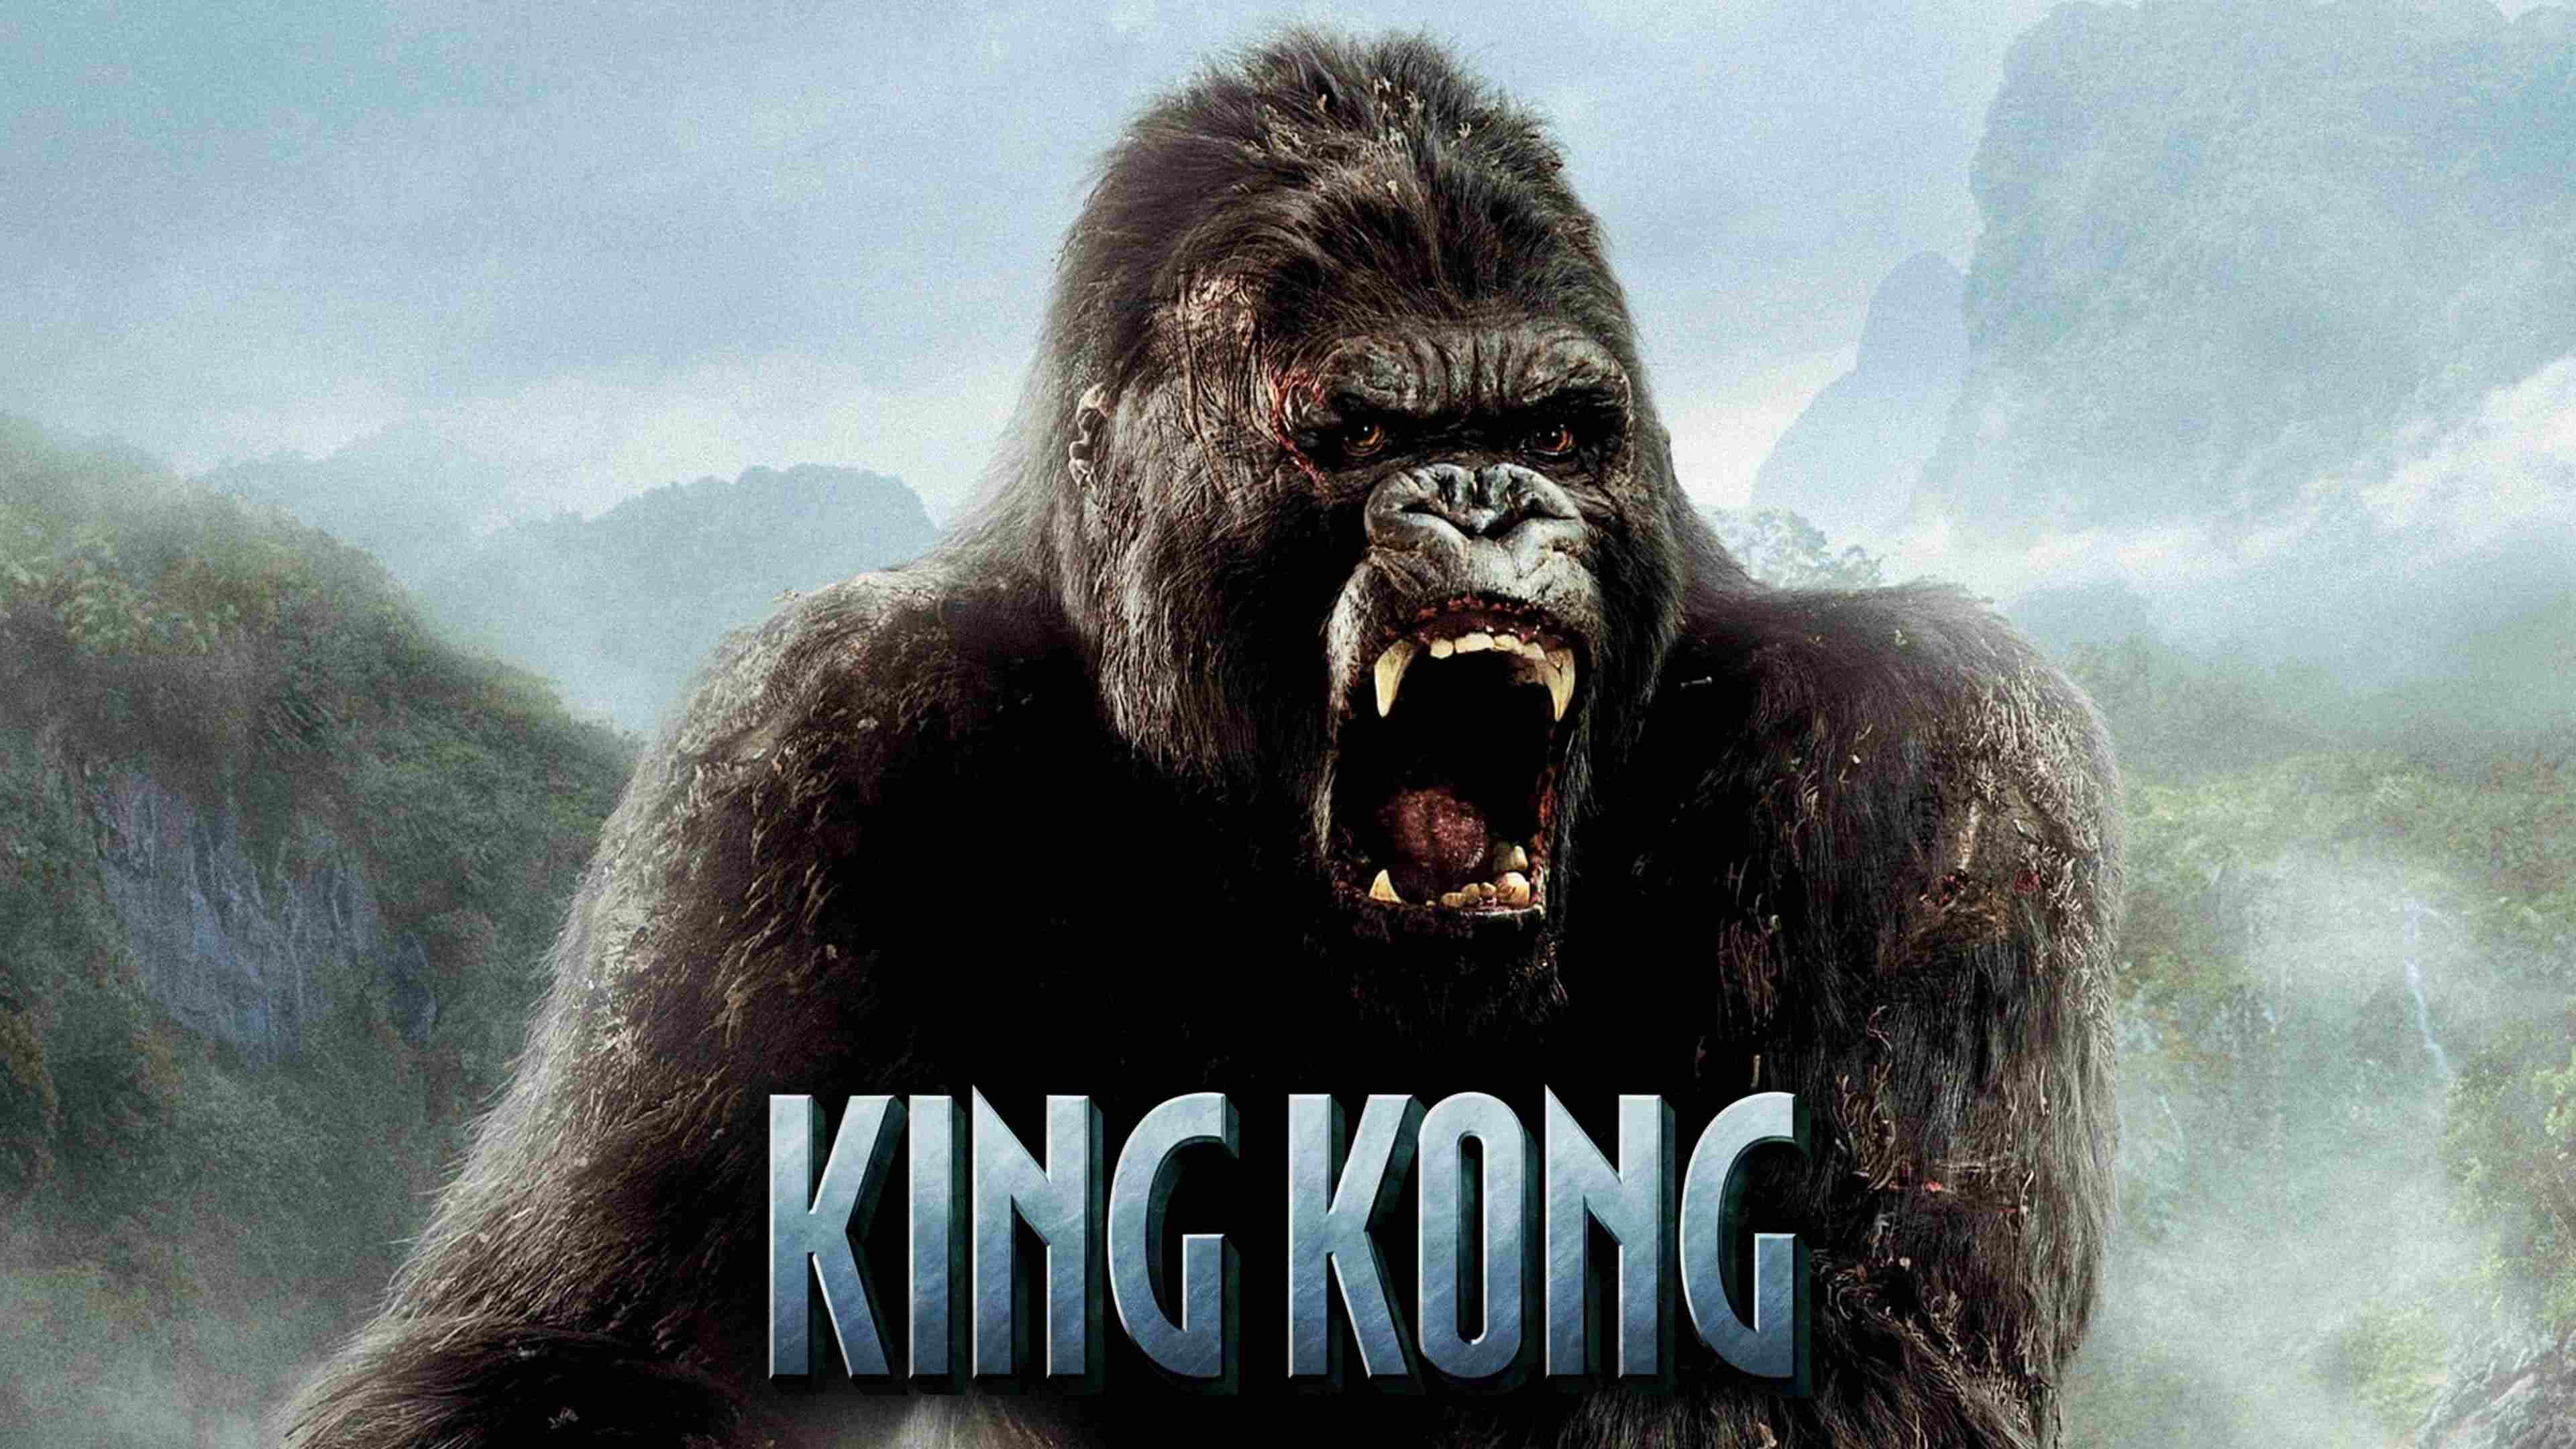 20 facts you might not know about Peter Jackson's 'King Kong